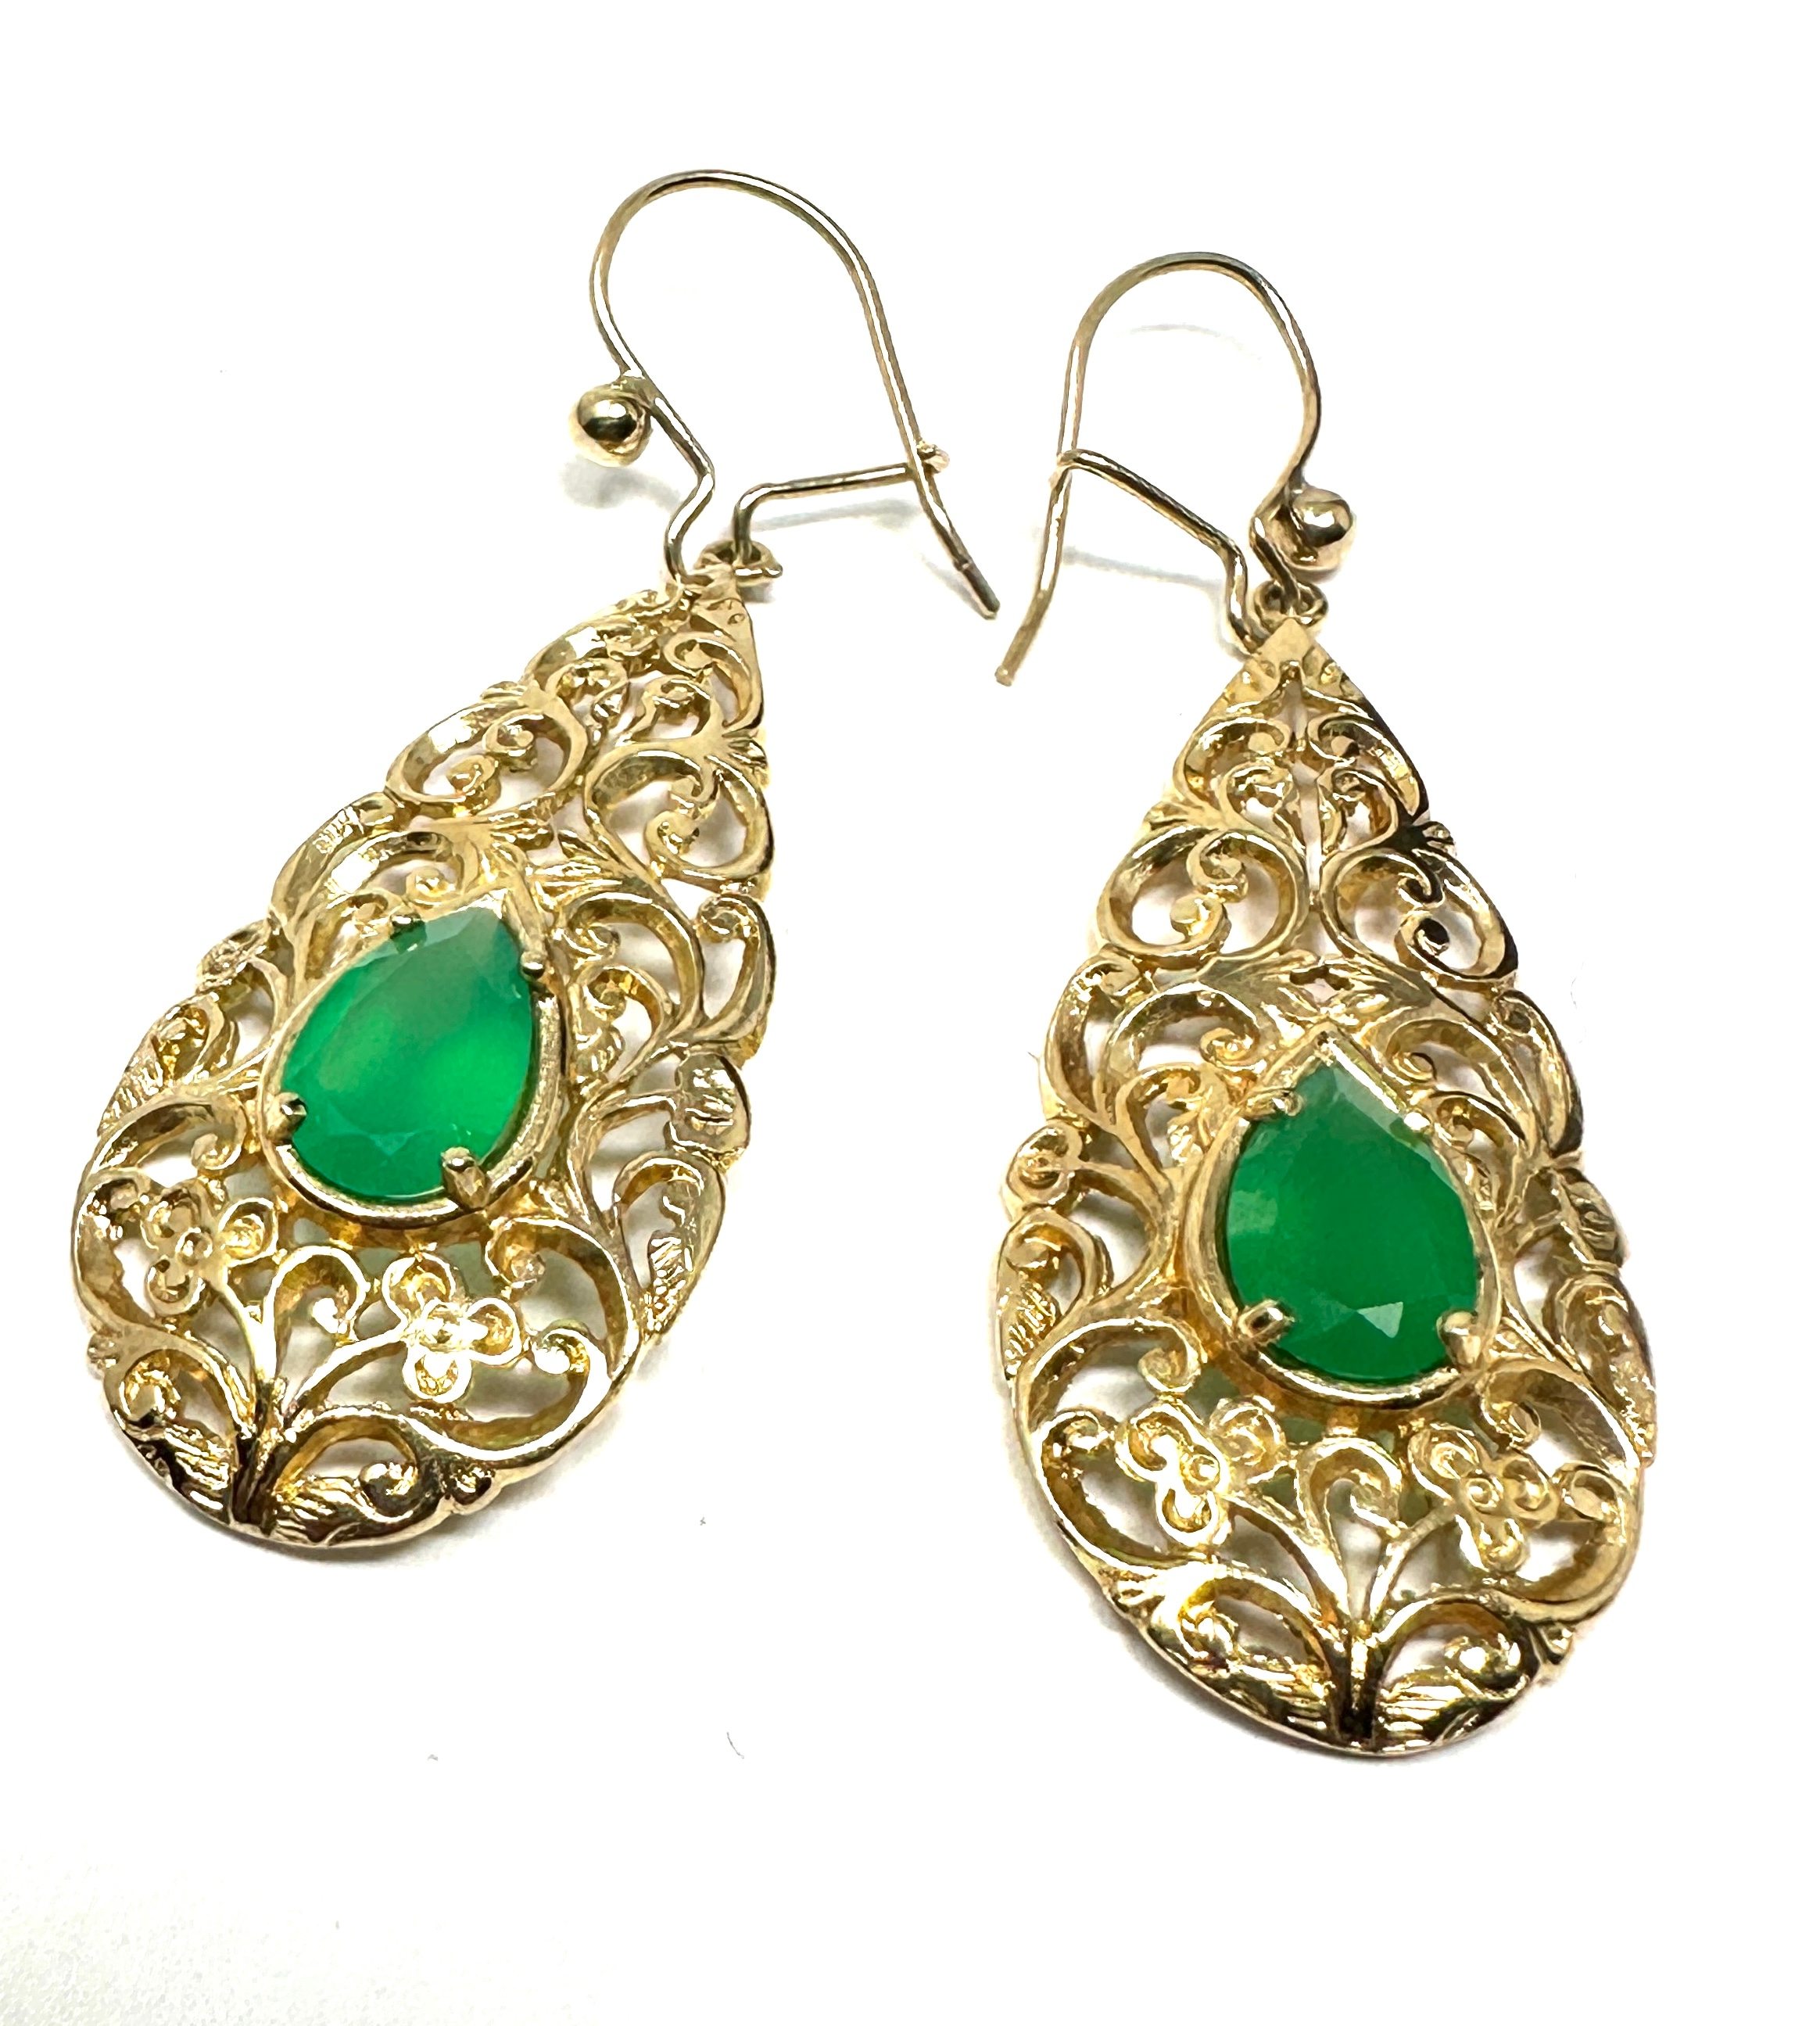 9ct gold chrysoprase earrings weight 5.3 gram measure approx 3.6cm drop not including fixing